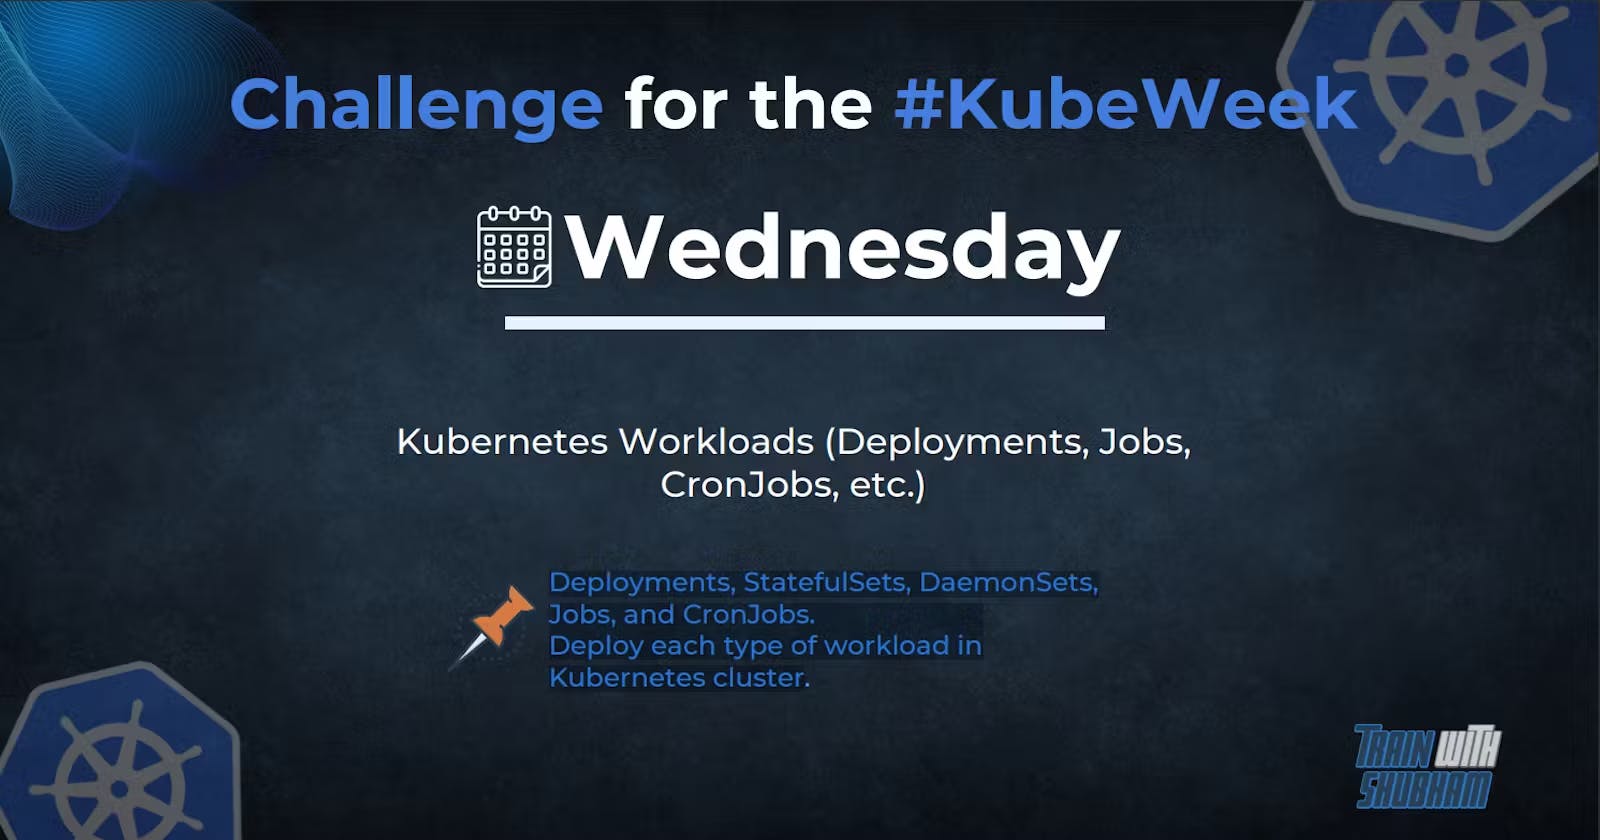 Kubernetes Deployments, Stateful Sets, Daemon Sets, Jobs and Cronjobs. 
Deploy each type of workload in Kubernetes cluster